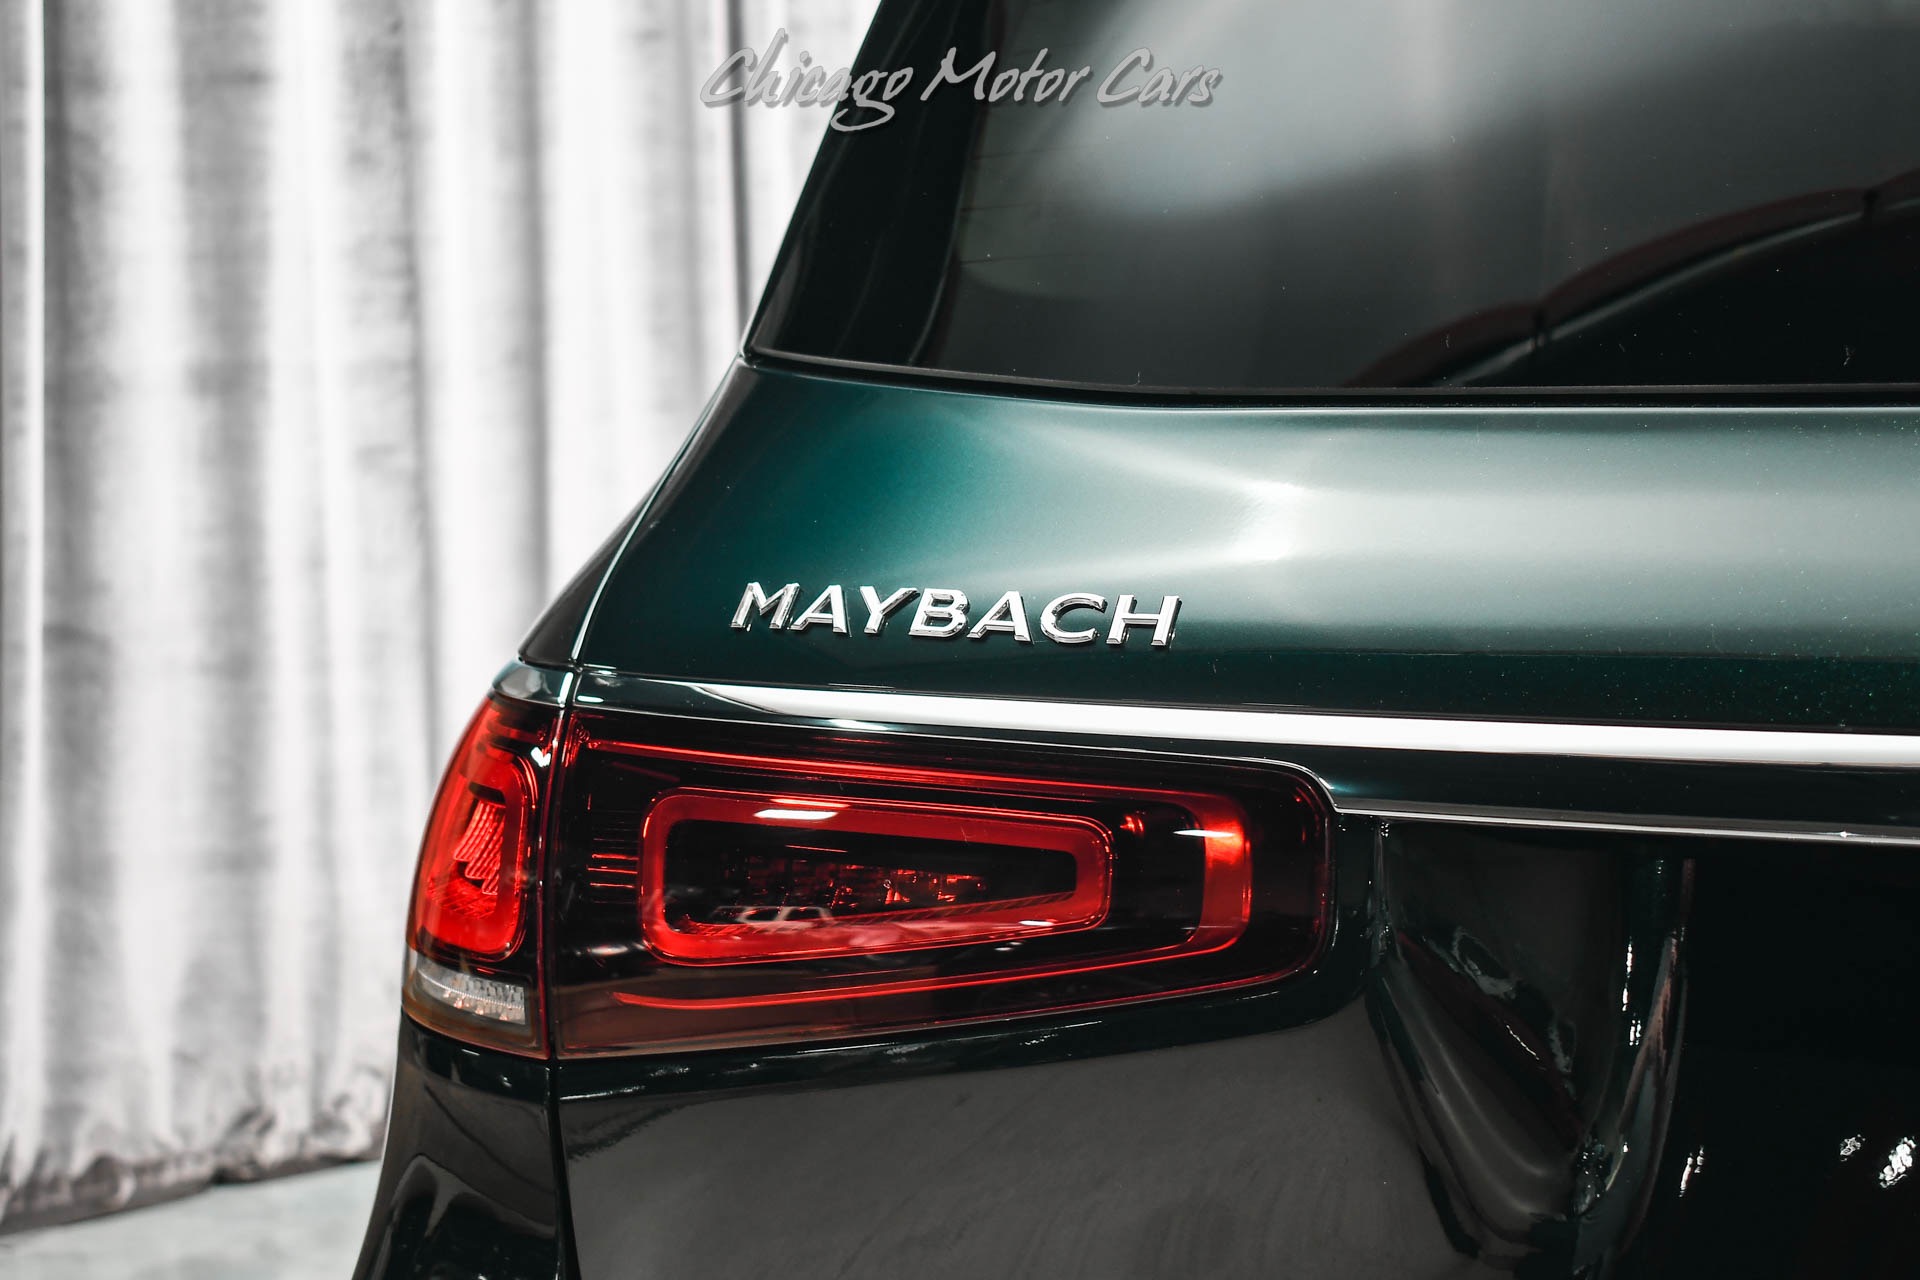 Used-2022-Mercedes-Benz-Maybach-GLS-600-4MATIC-BRAND-NEW-REFRIGERATED-COMPARTMENT-REAR-FOLDING-TABLES